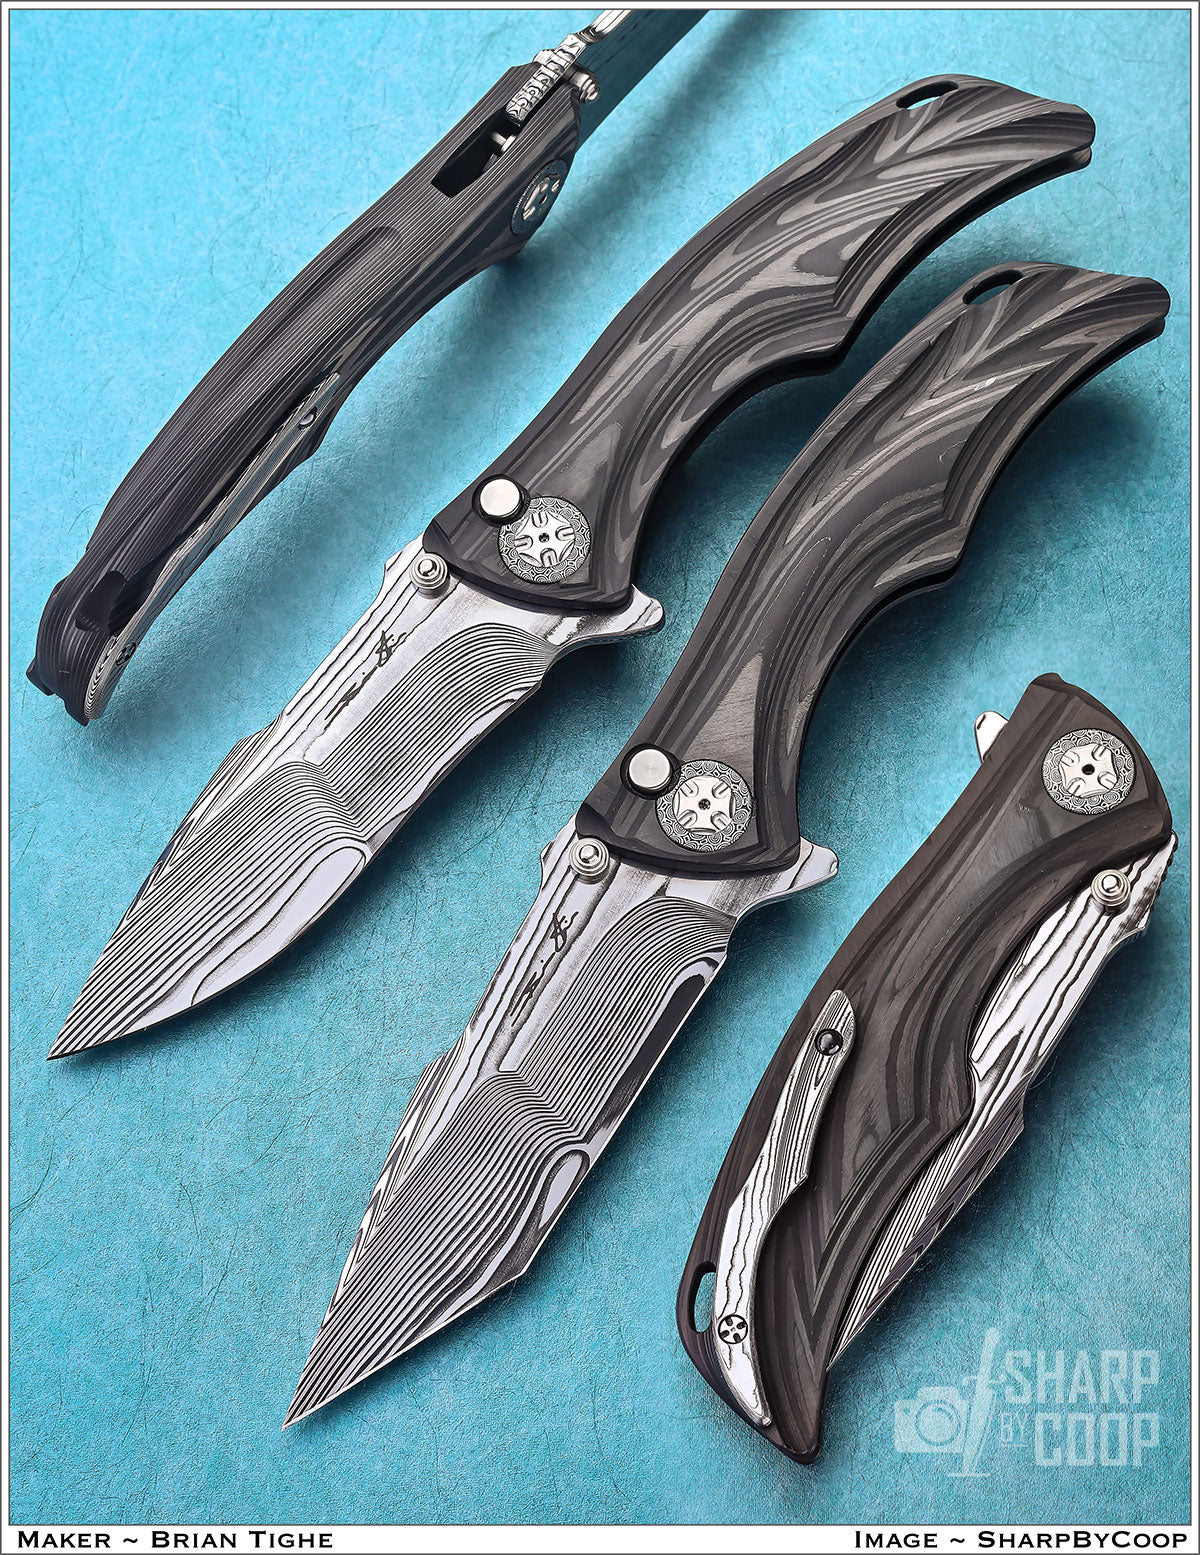 Tighe Down Unidirectional Carbon Fiber Integrals With Stripped Damasteel Blade’s